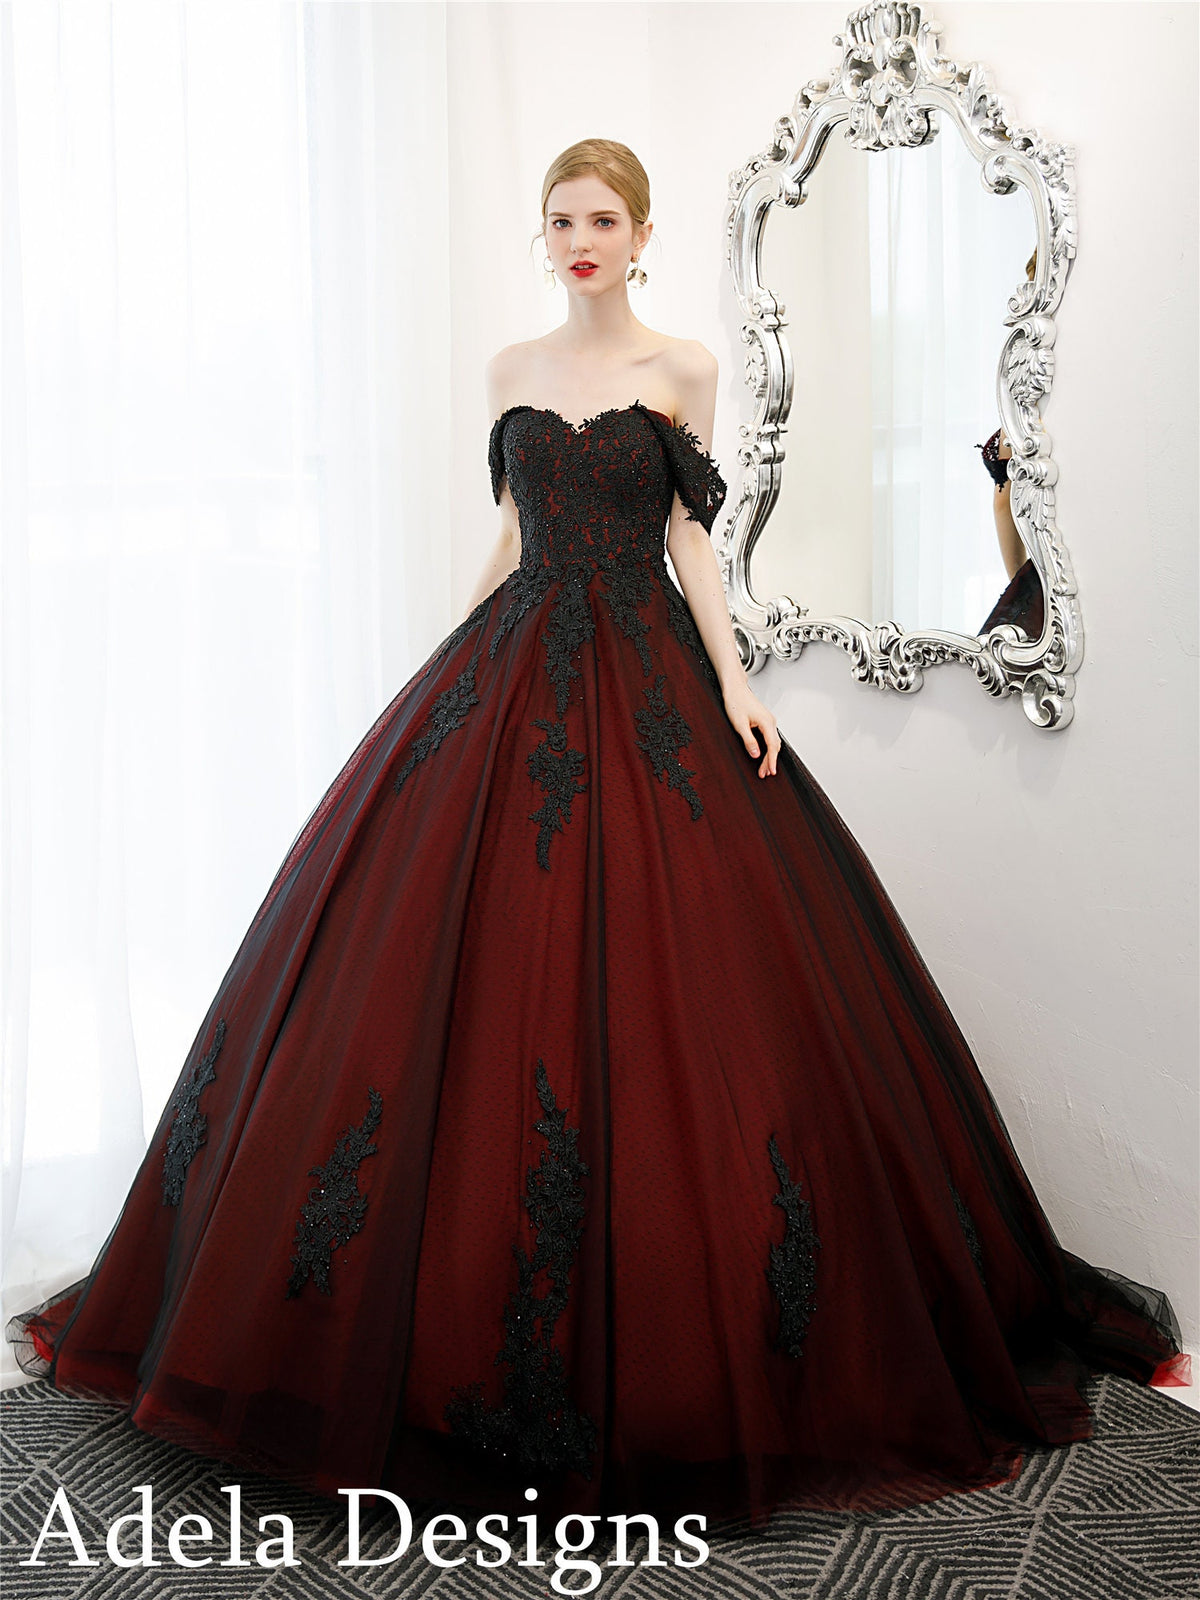 Black And Dark Red Ball Gown Gothic Wedding Dress Bridal Off The Shoulder Lace Bare Shoulders Open Back Ballgown